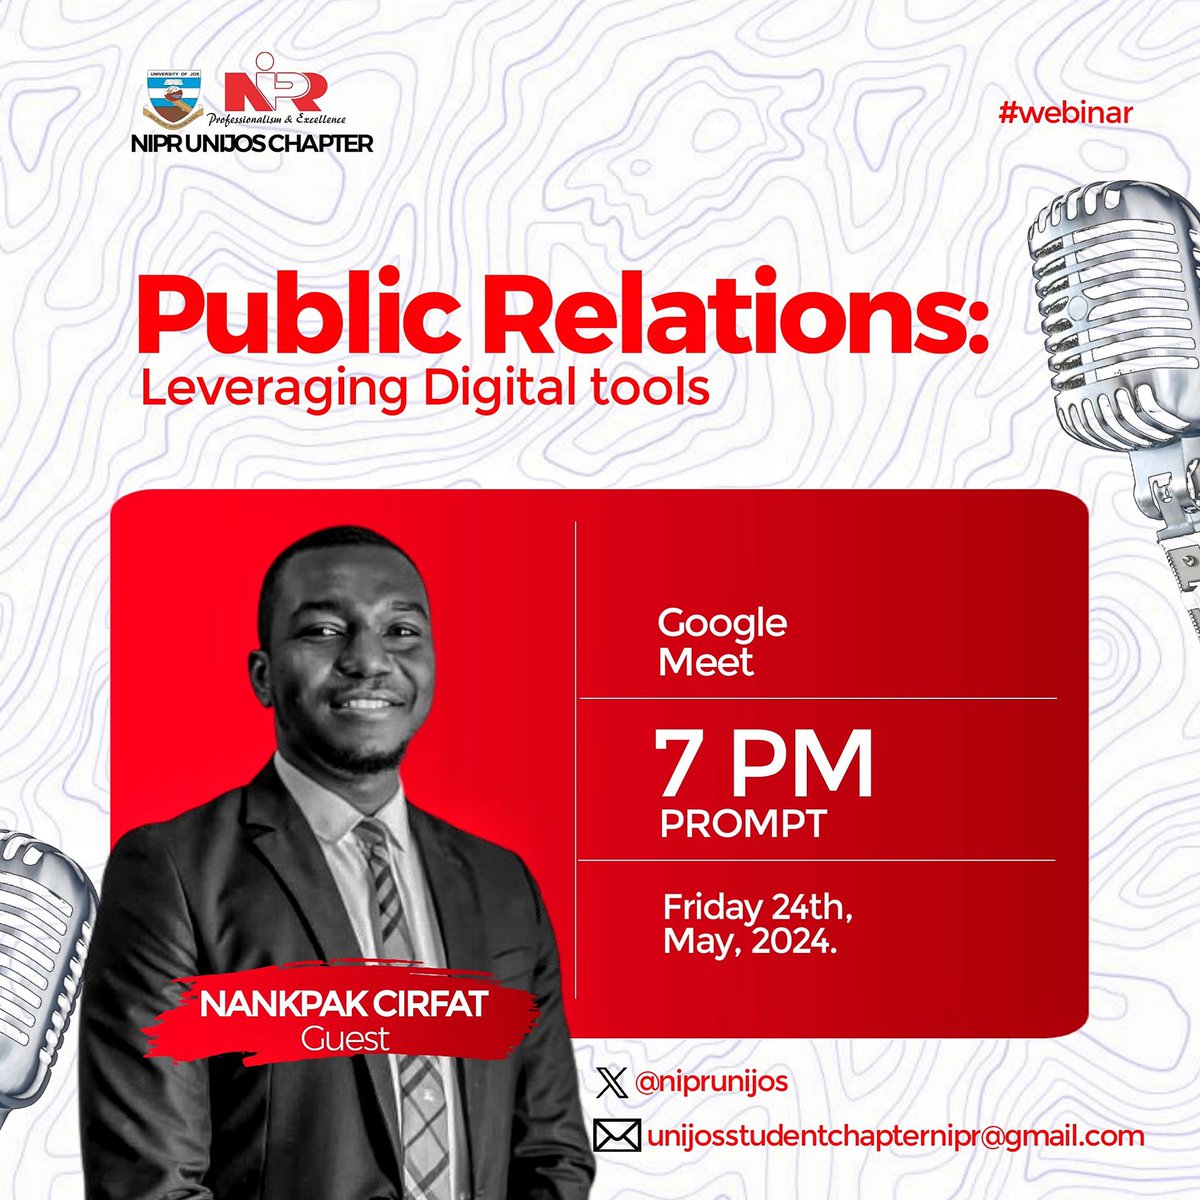 Excited to join my alma mater's NIPR Chapter tonight to discuss leveraging digital tools in PR! I remember struggling to revive the student chapter at Unijos as an undergrad some years back, and now, I'm a proud member practicing this noble profession.

#SpeakLife #Reinvent #NIPR